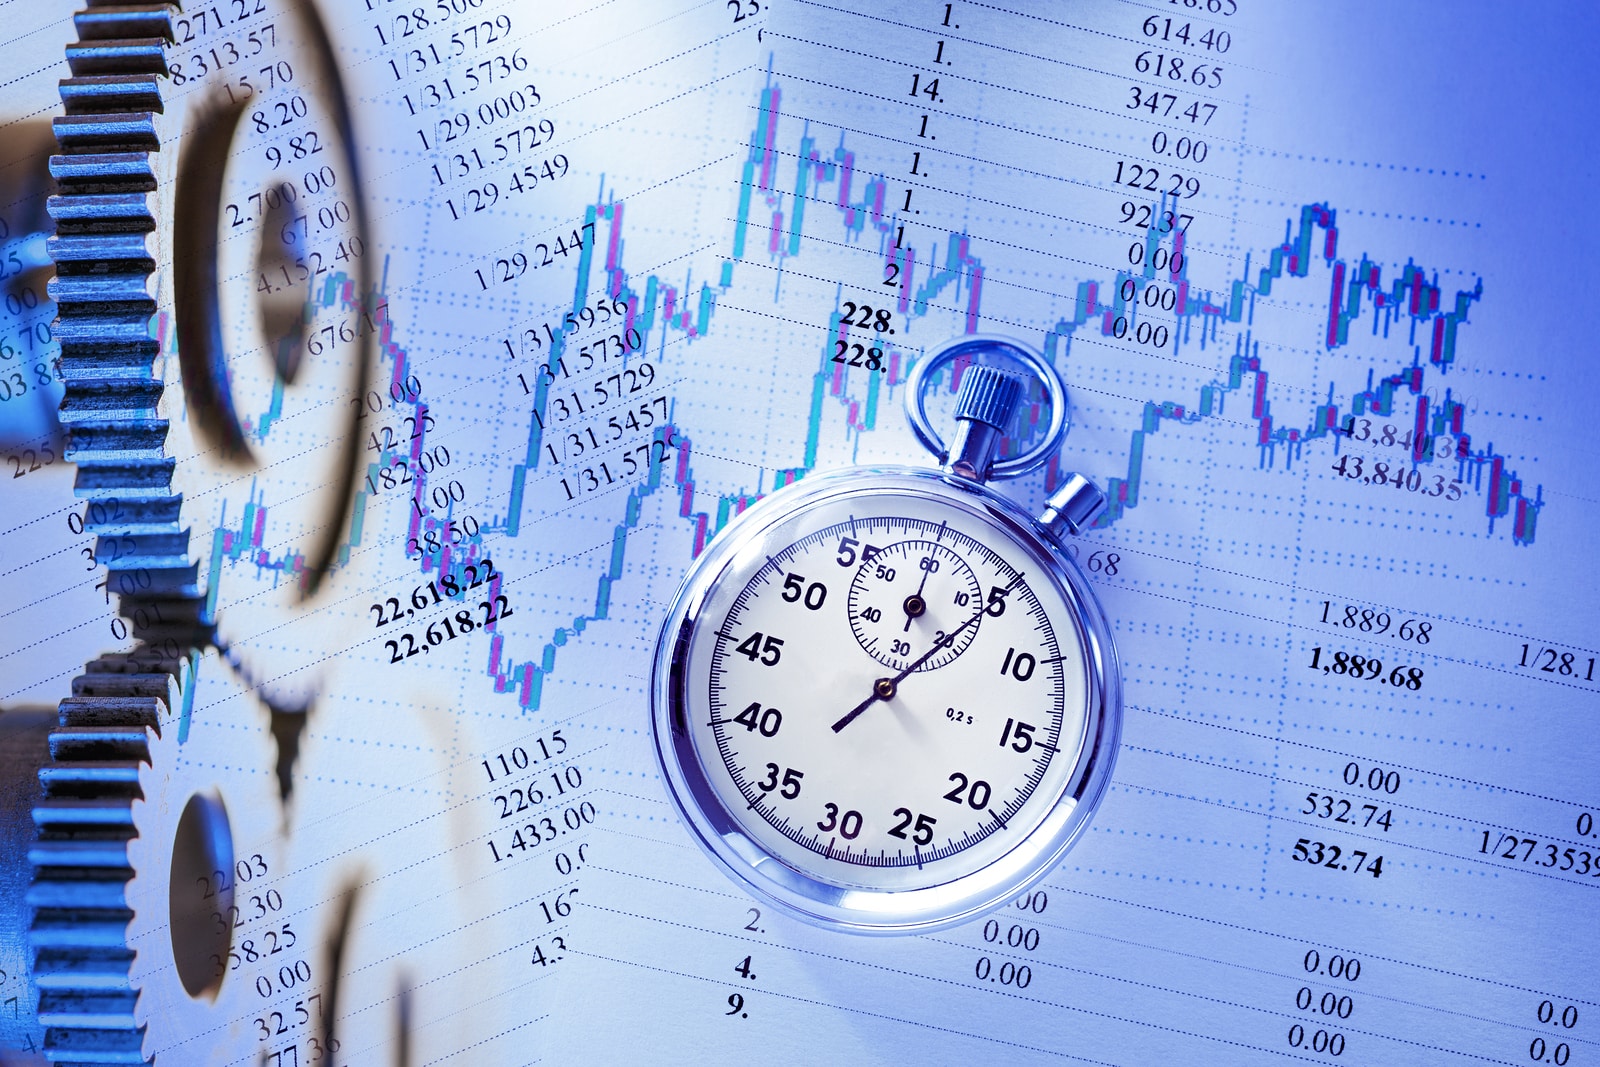 Your Time in the Market: More Important than Timing the Market